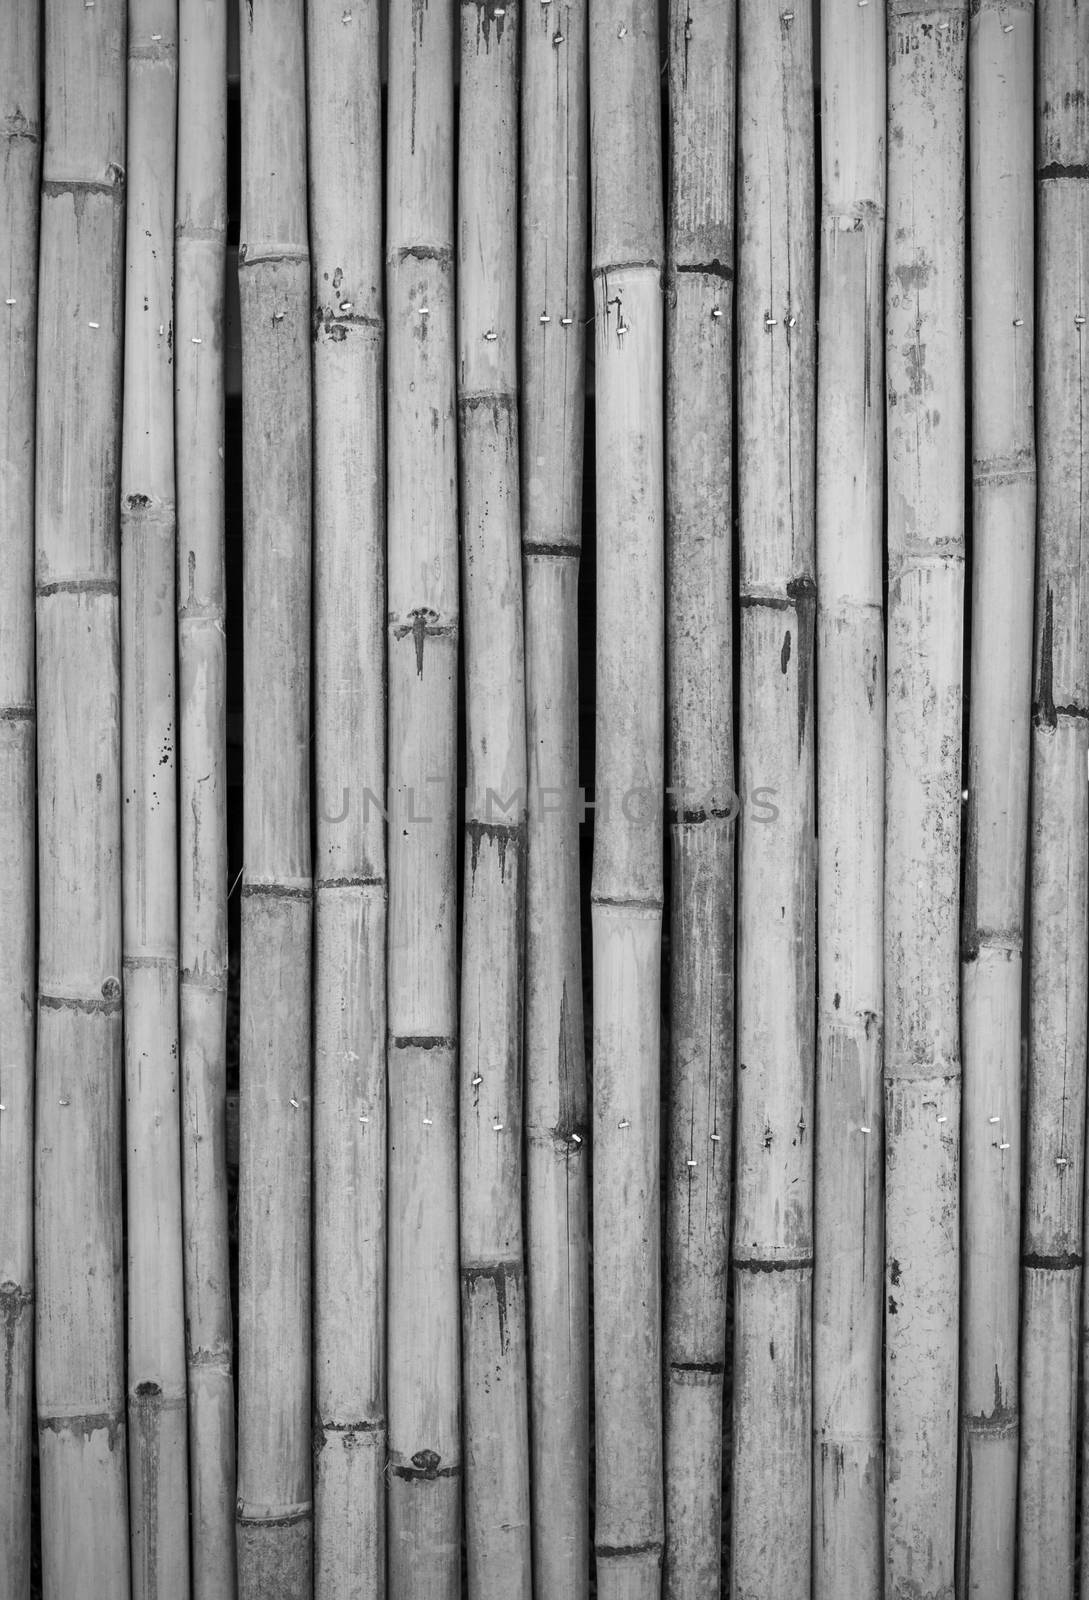 close-up of bamboo fence background in the park, outdoor, black and white